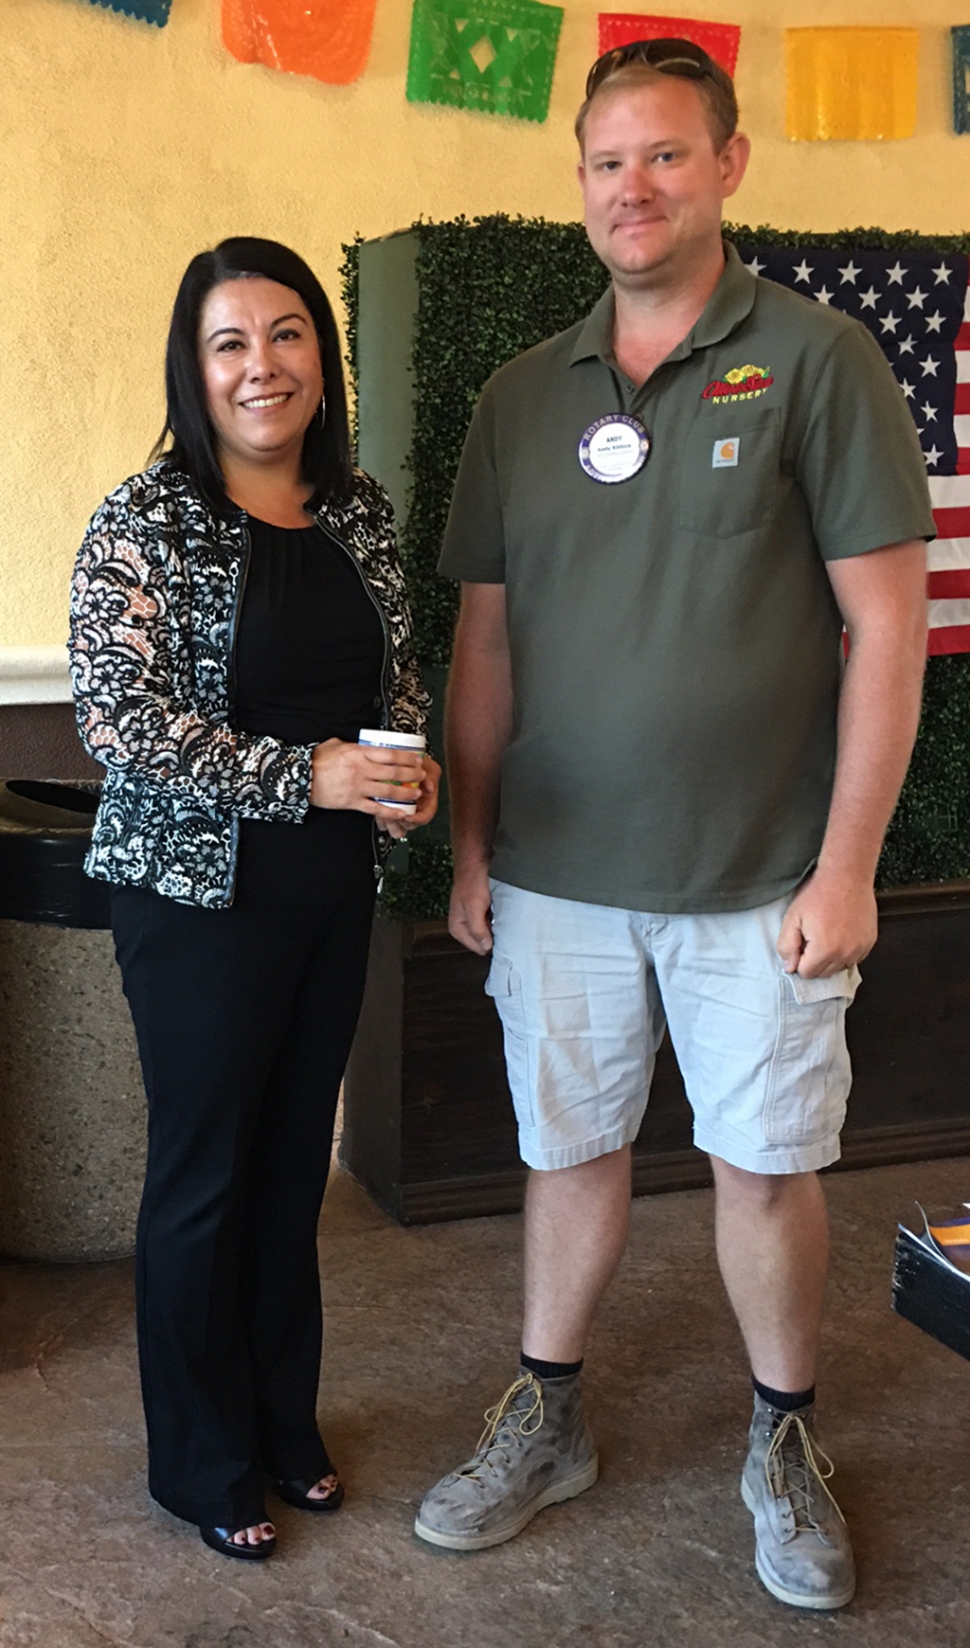 Pictured above is FUSD Superintendent Chrissy Schieferle, with Rotary Club President Andy Klittich, after her speech to the group.